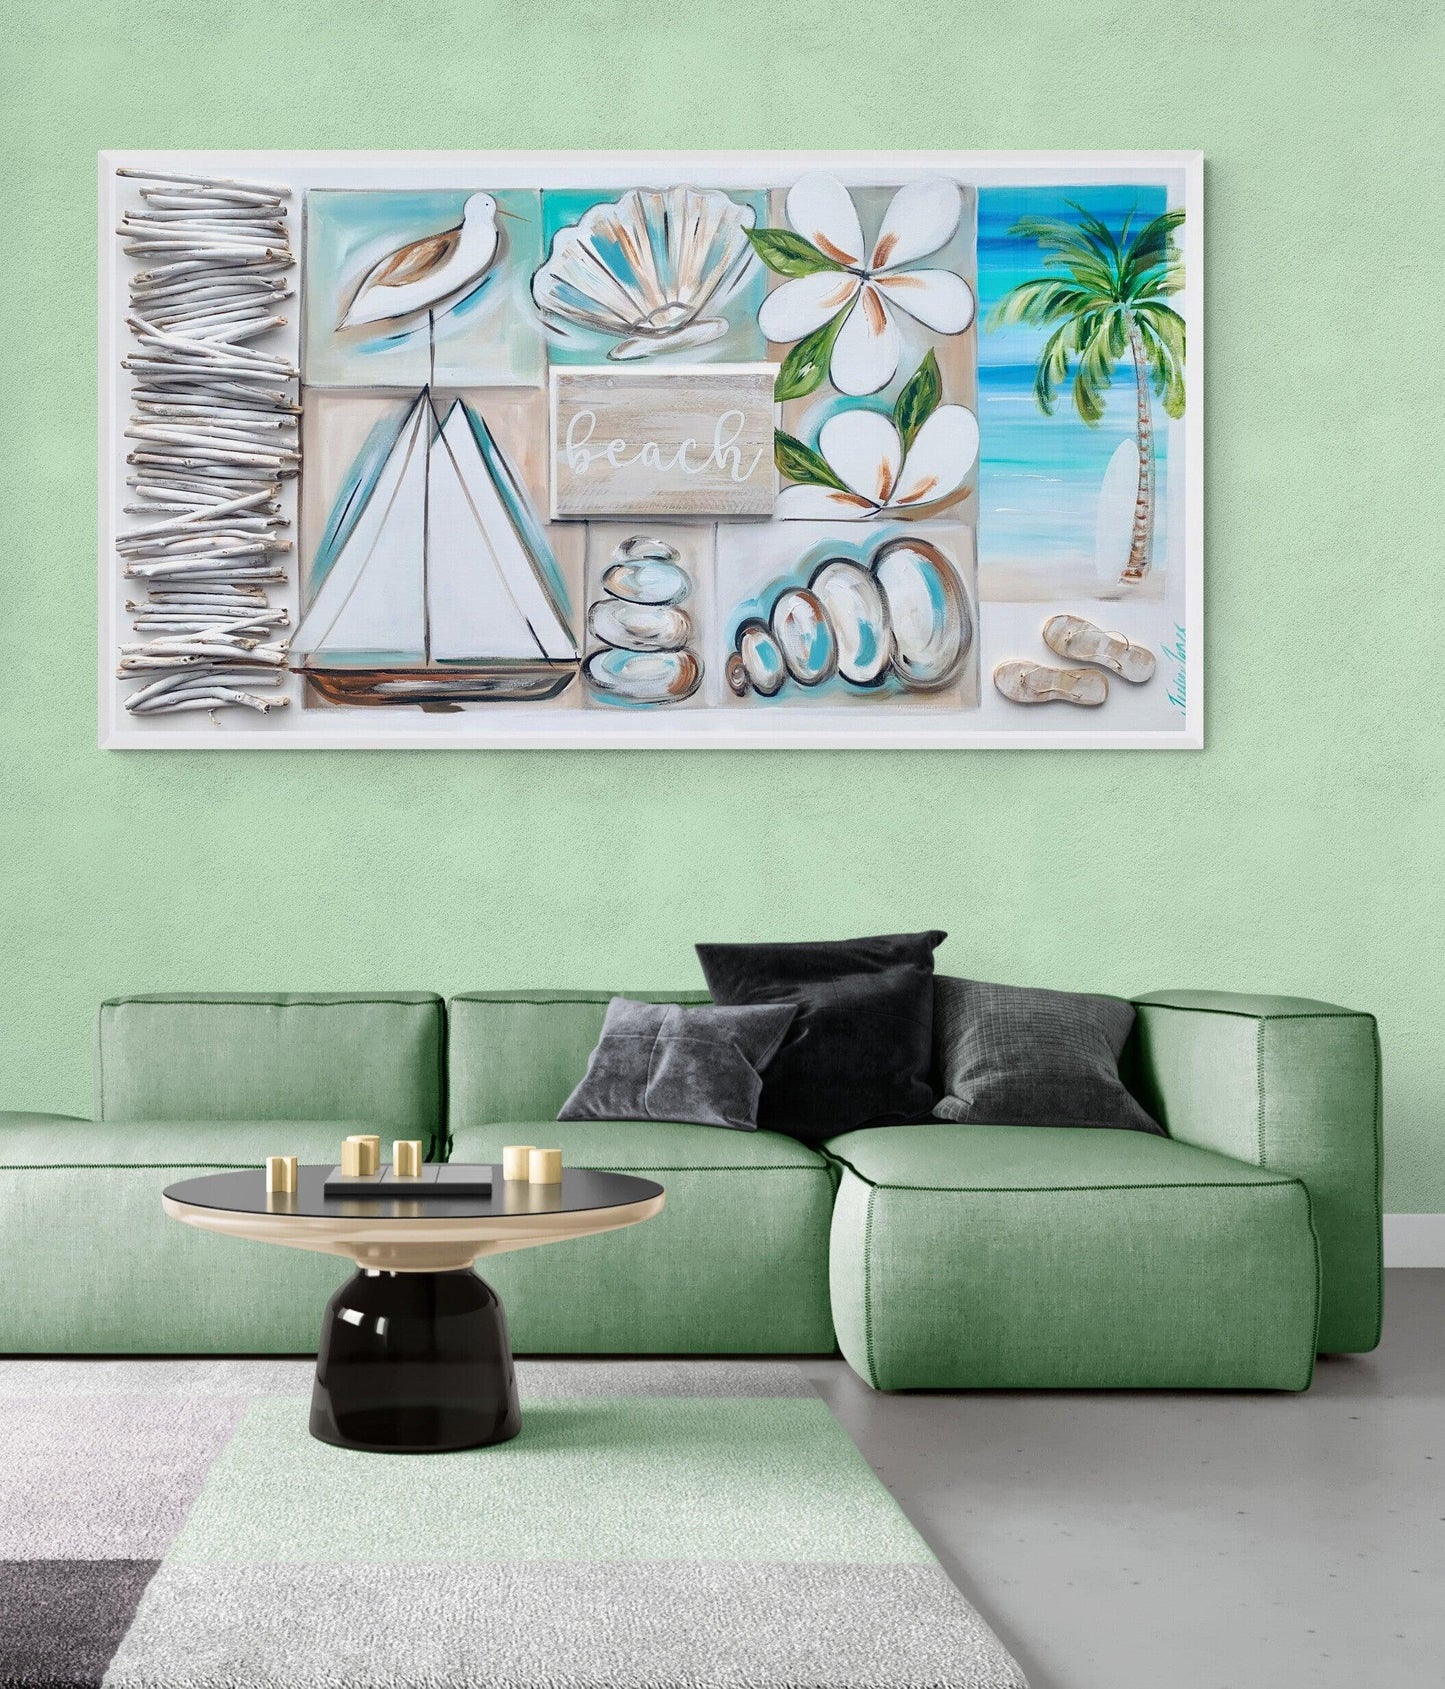 Who doesn’t love the beach life - 1.5 x 800 - Original Artwork - Available by Commission